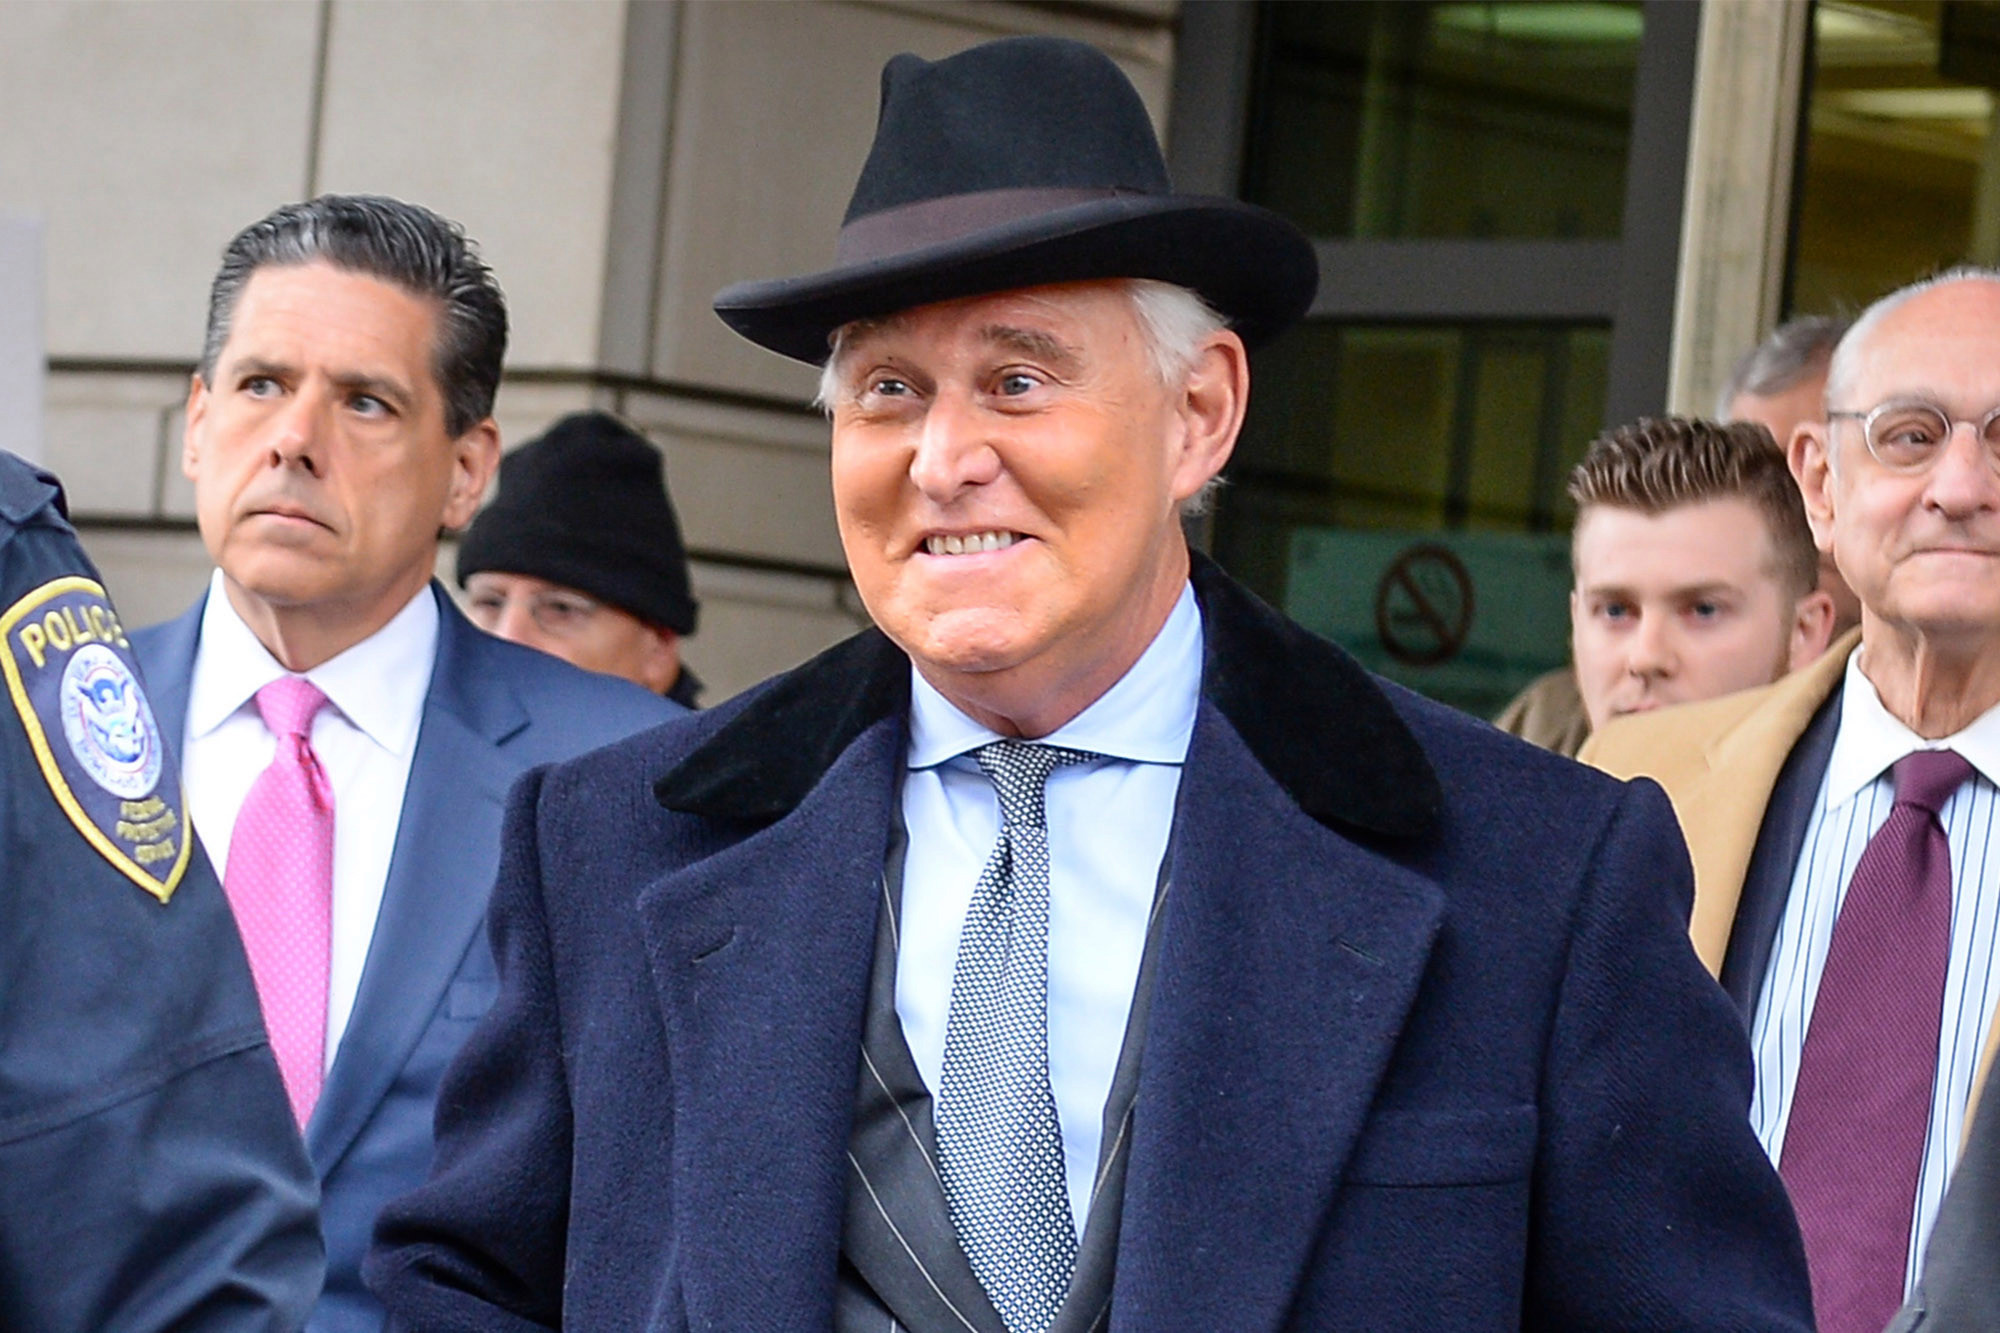 The Initial Roger Stone Fallout